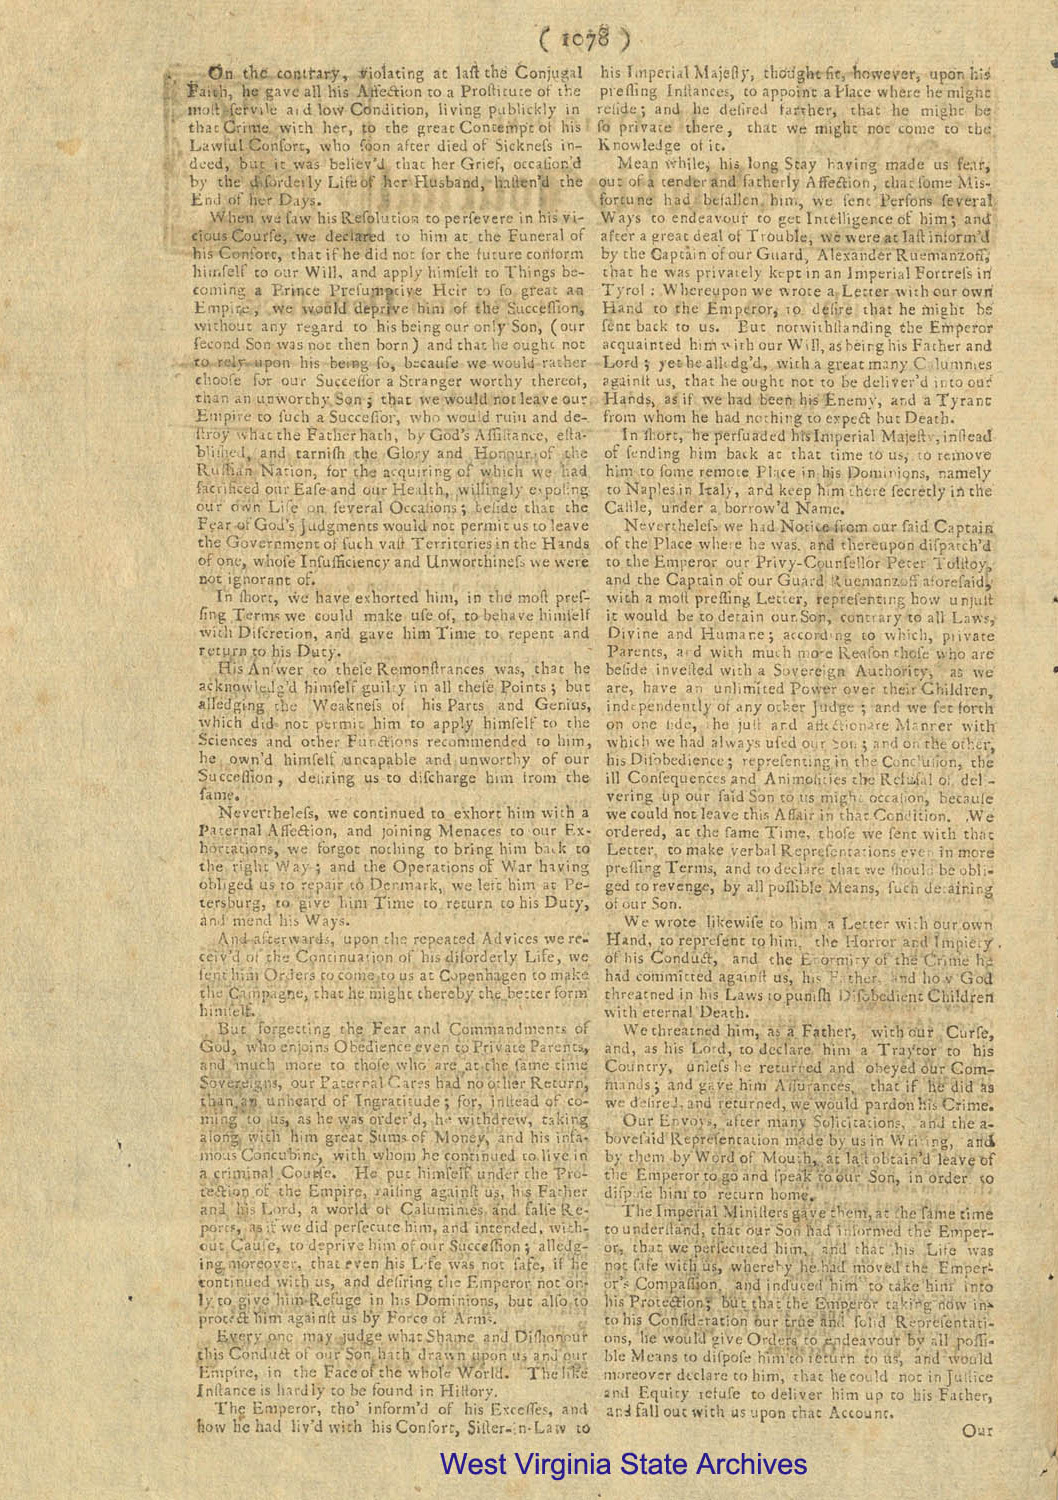 <i>The Original Weekly Journal</i> (London, England) featuring an open letter from Peter the Great discussing the actions of son Alexi, 1718. (MN-20)